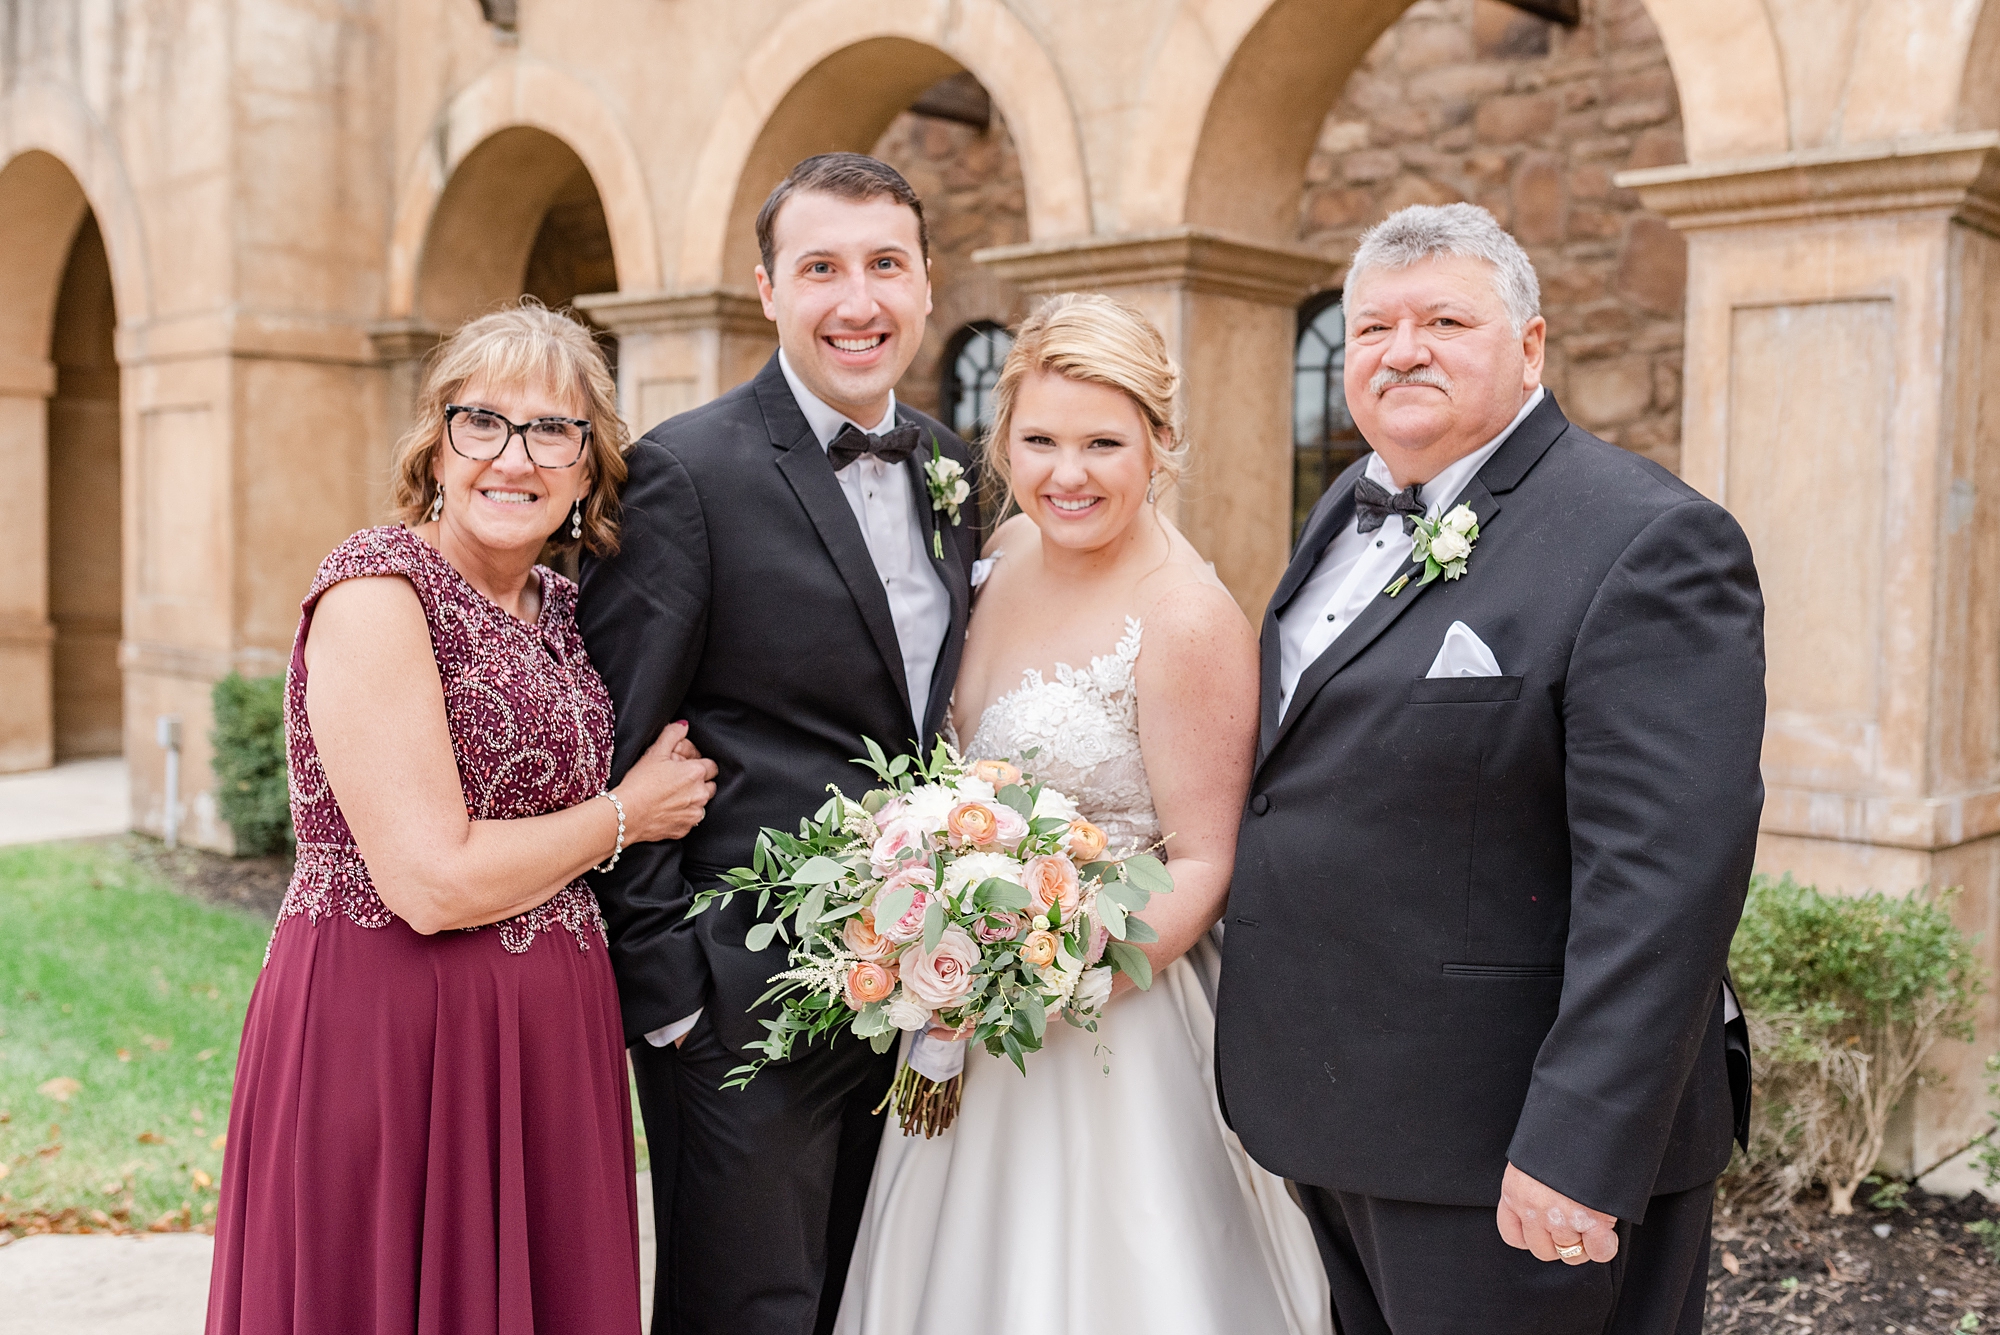 parents of groom pose with newlyweds